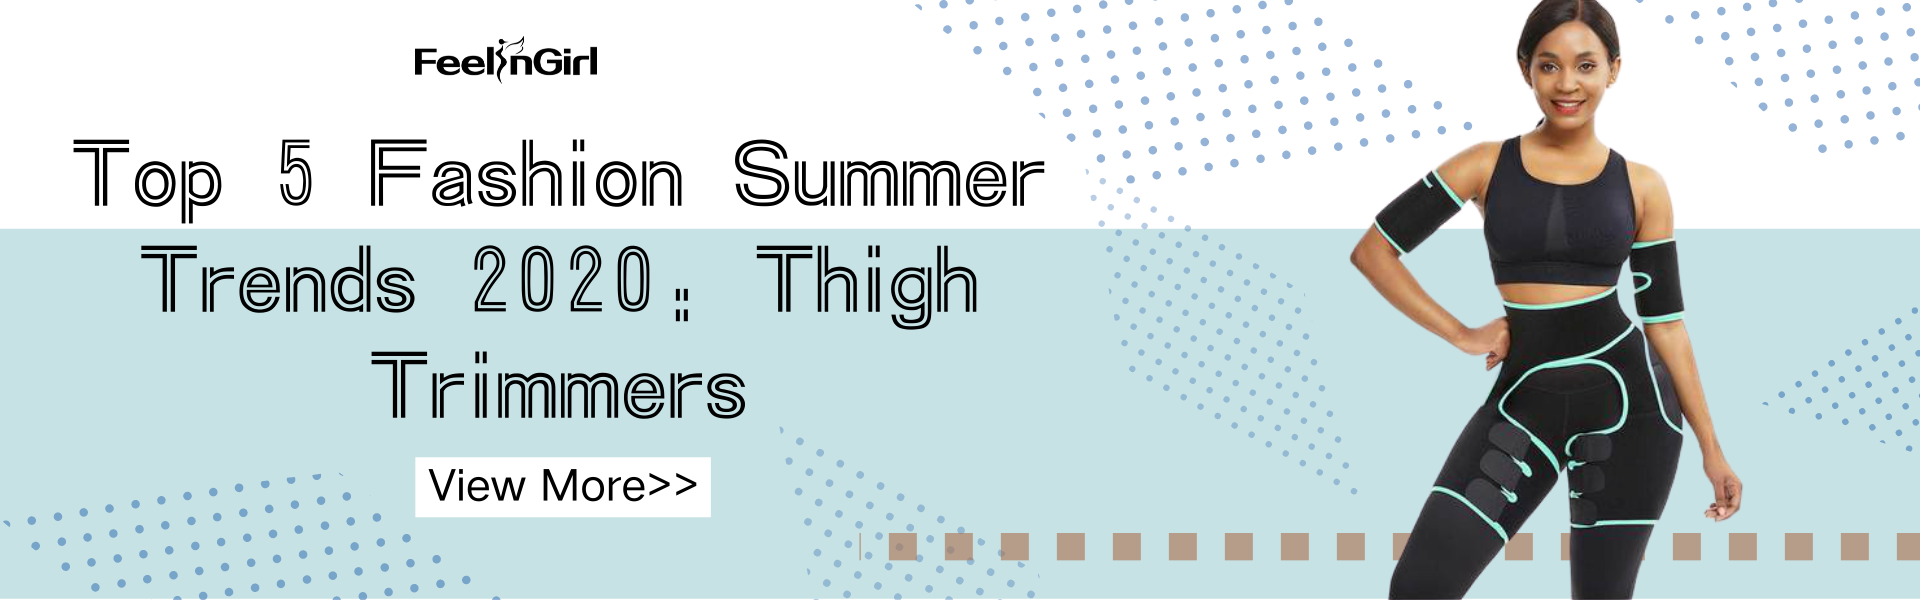 Top 5 Fashion Summer Trends 2020: Thigh Trimmers